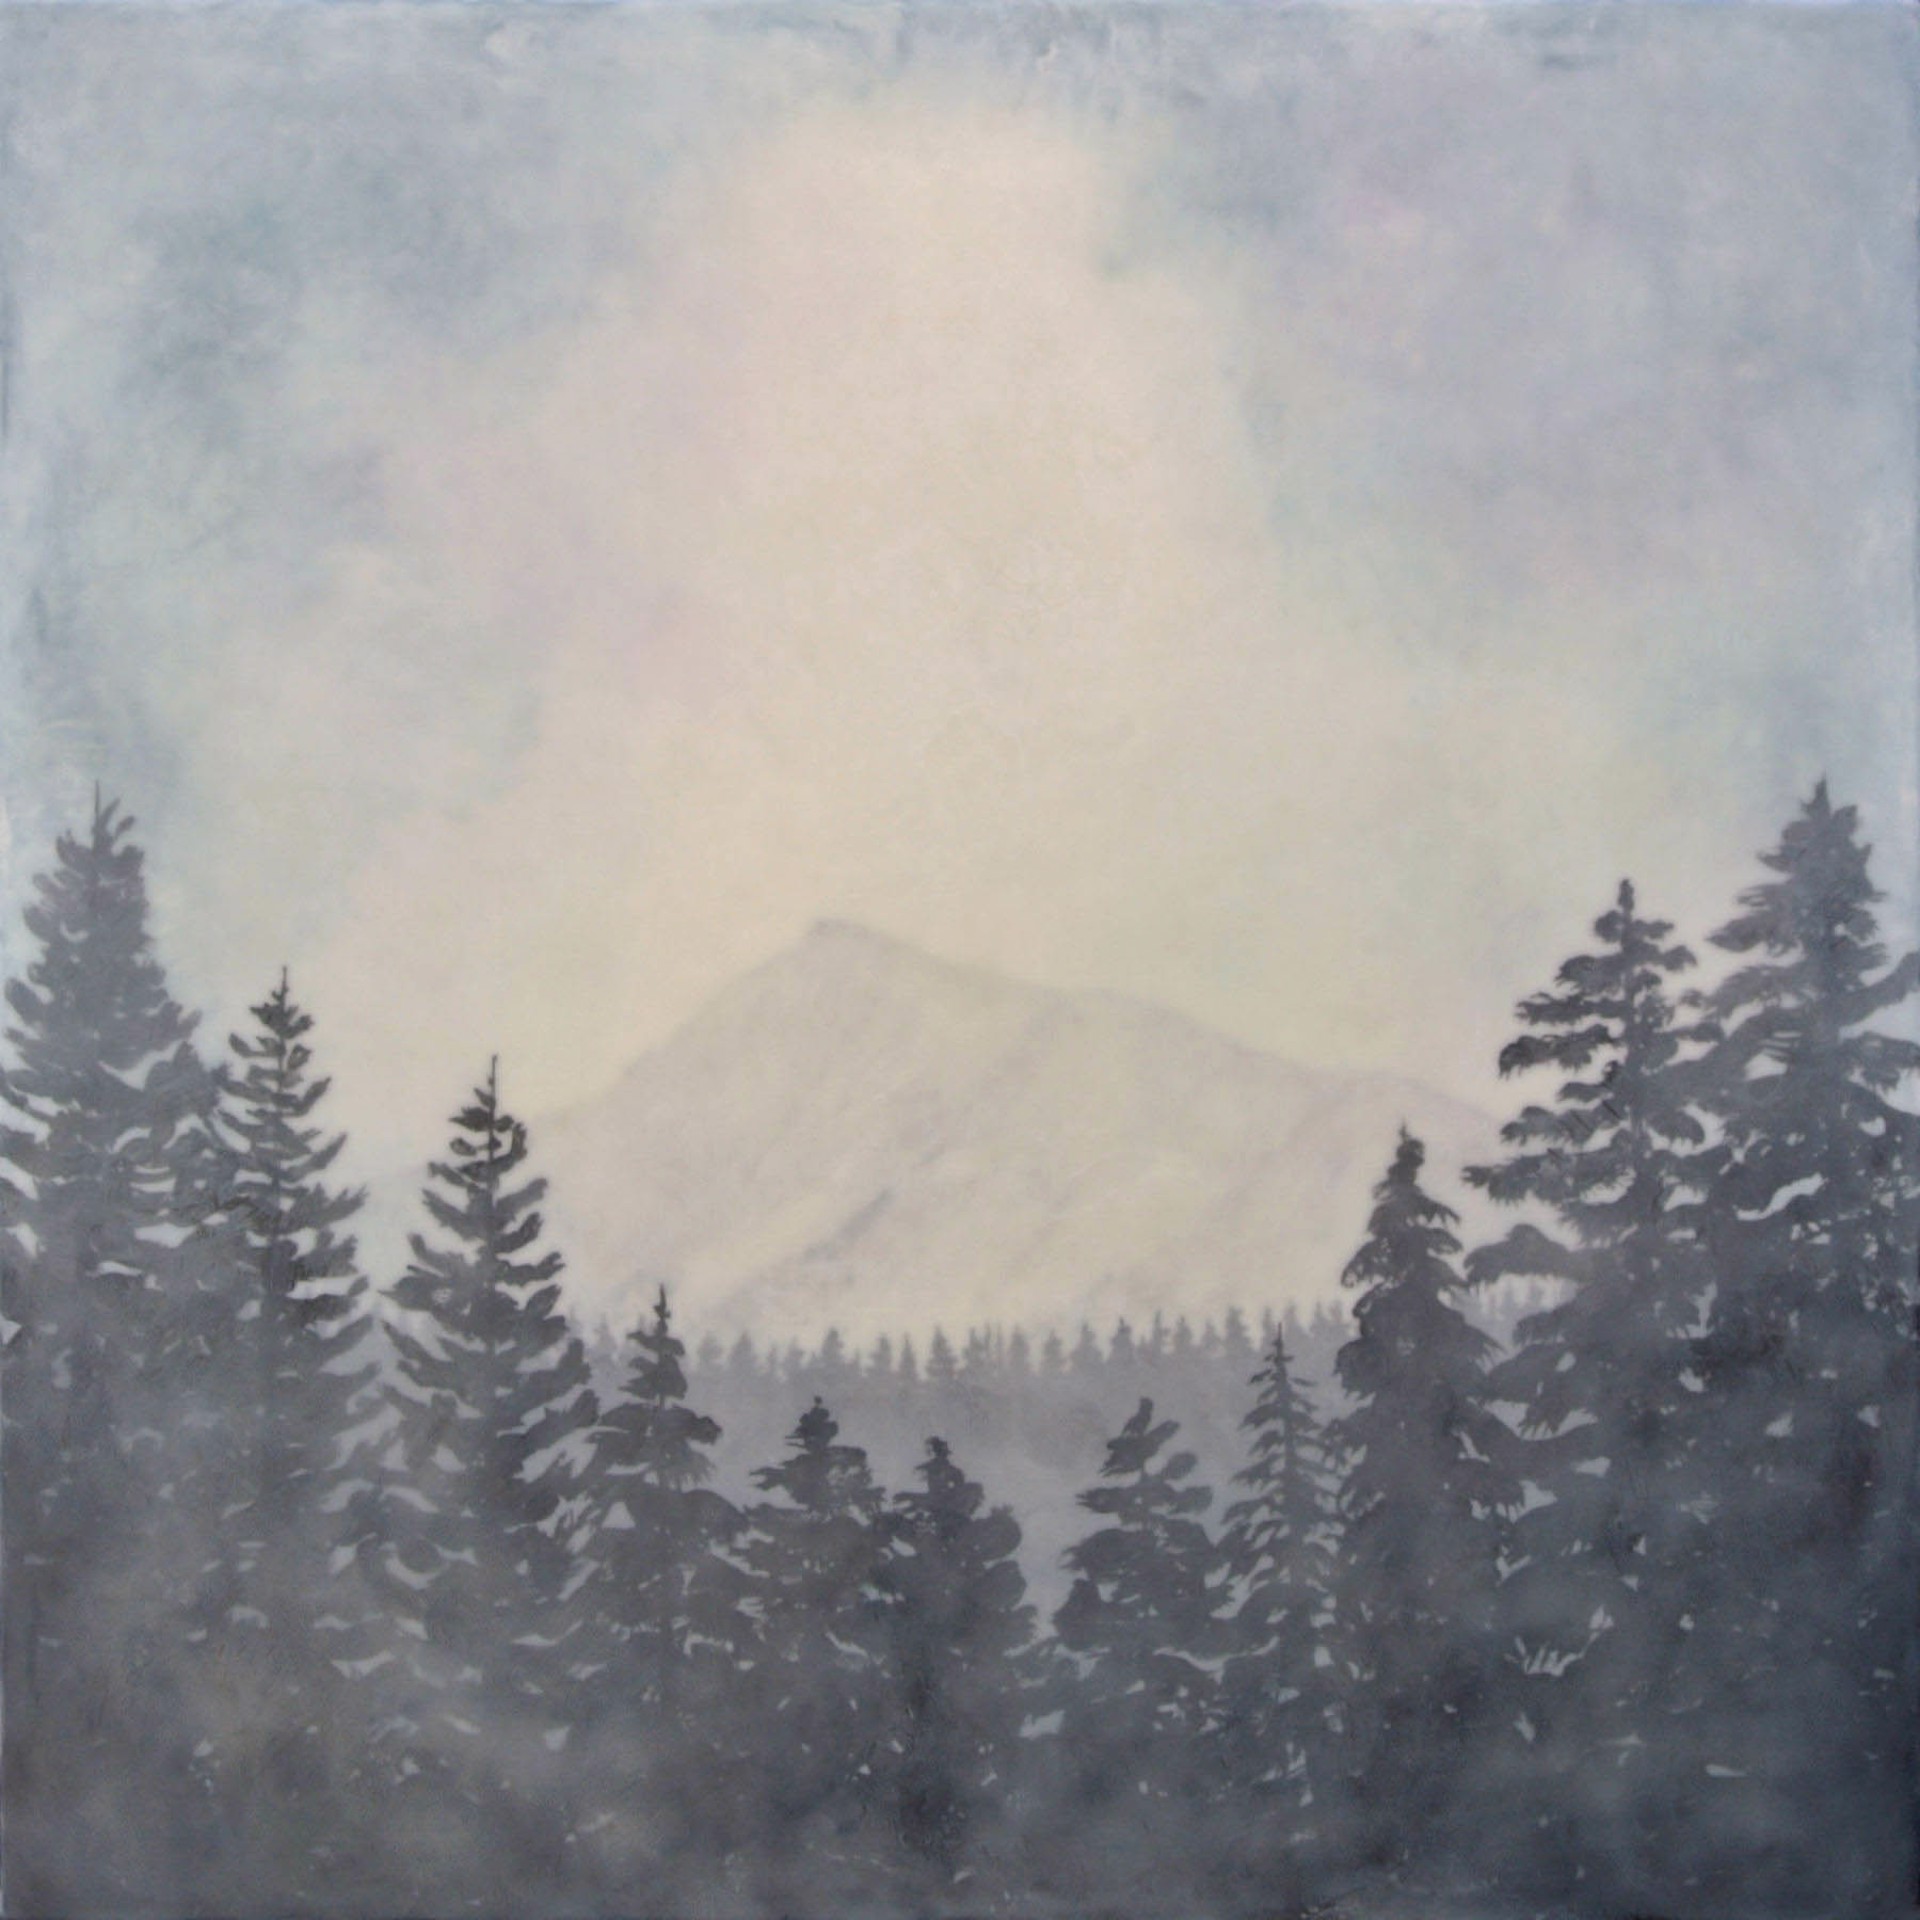 Original Encaustic Landscape Painting Featuring A Mountain Peak Blurred In The Distance And Trees In Foreground